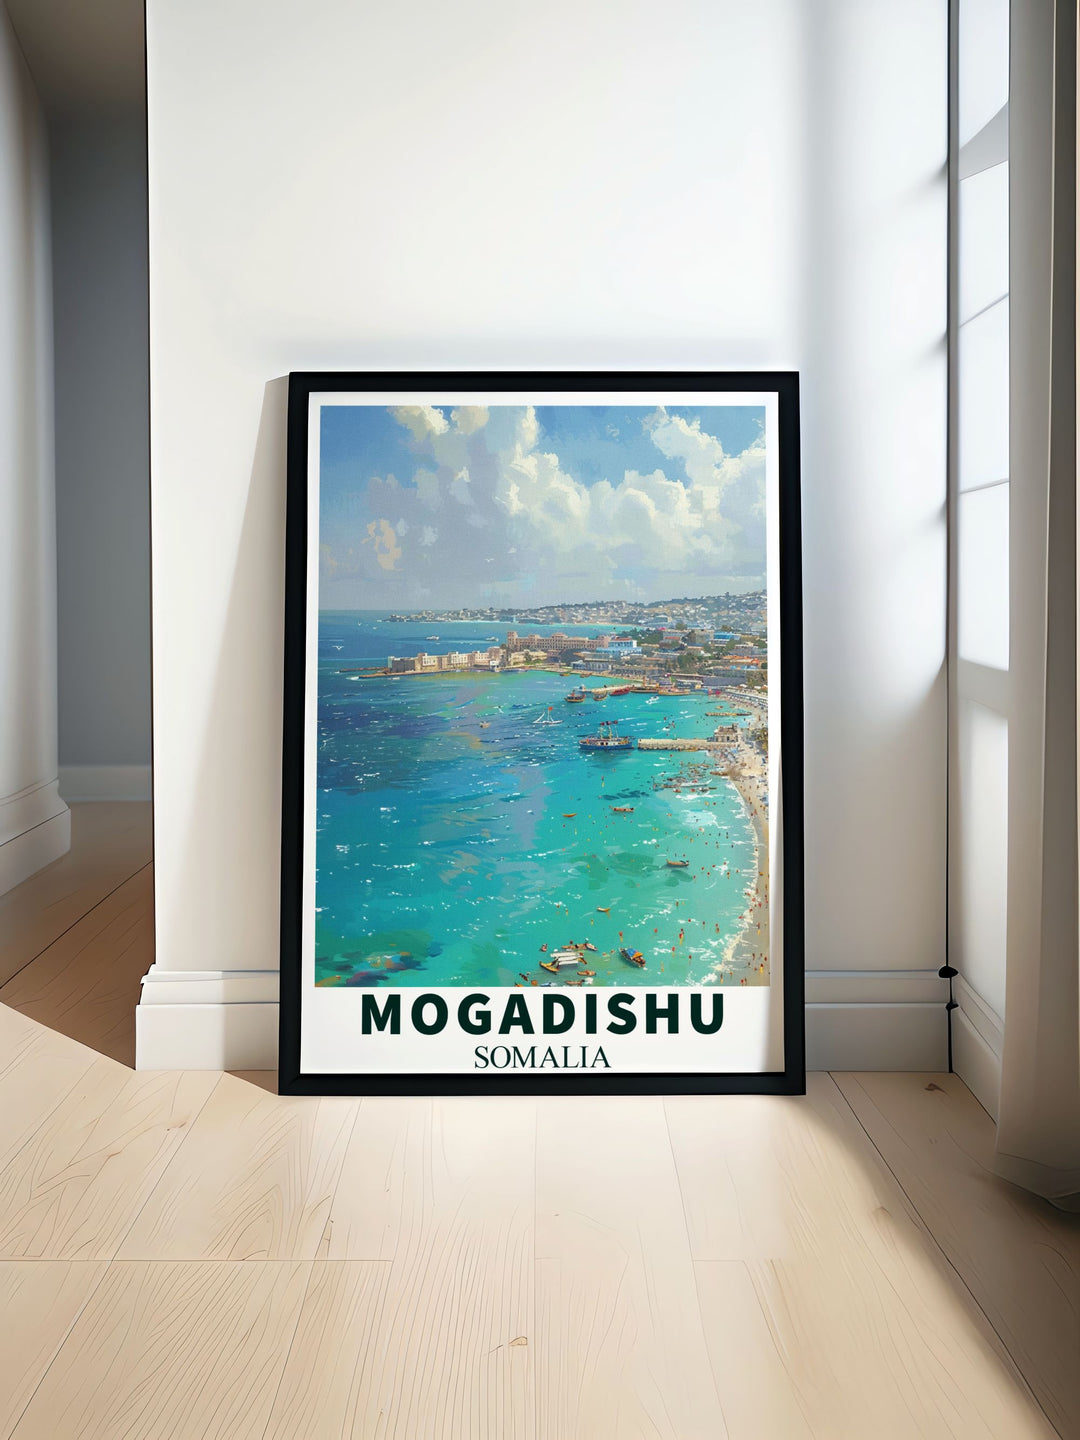 Featuring the majestic Lido Beach, this poster celebrates the unique blend of history and coastal beauty in Mogadishu, inviting viewers to explore the citys iconic sites and vibrant atmosphere.